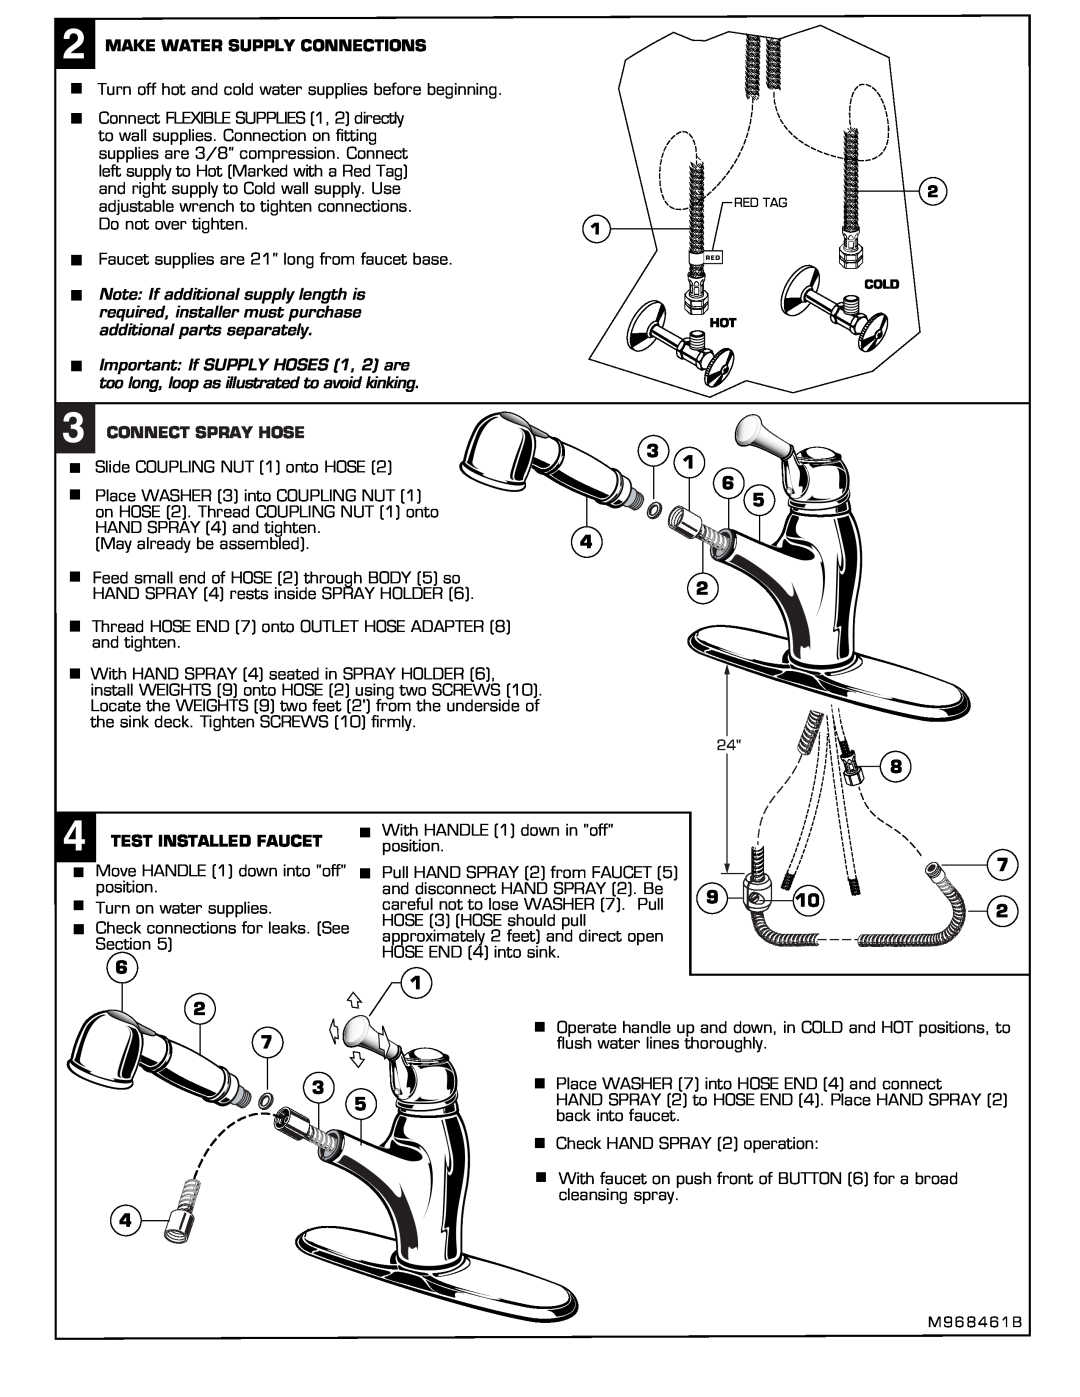 American Standard 4210 installation instructions Make Water Supply Connections, Connect Spray Hose, Test Installed Faucet 